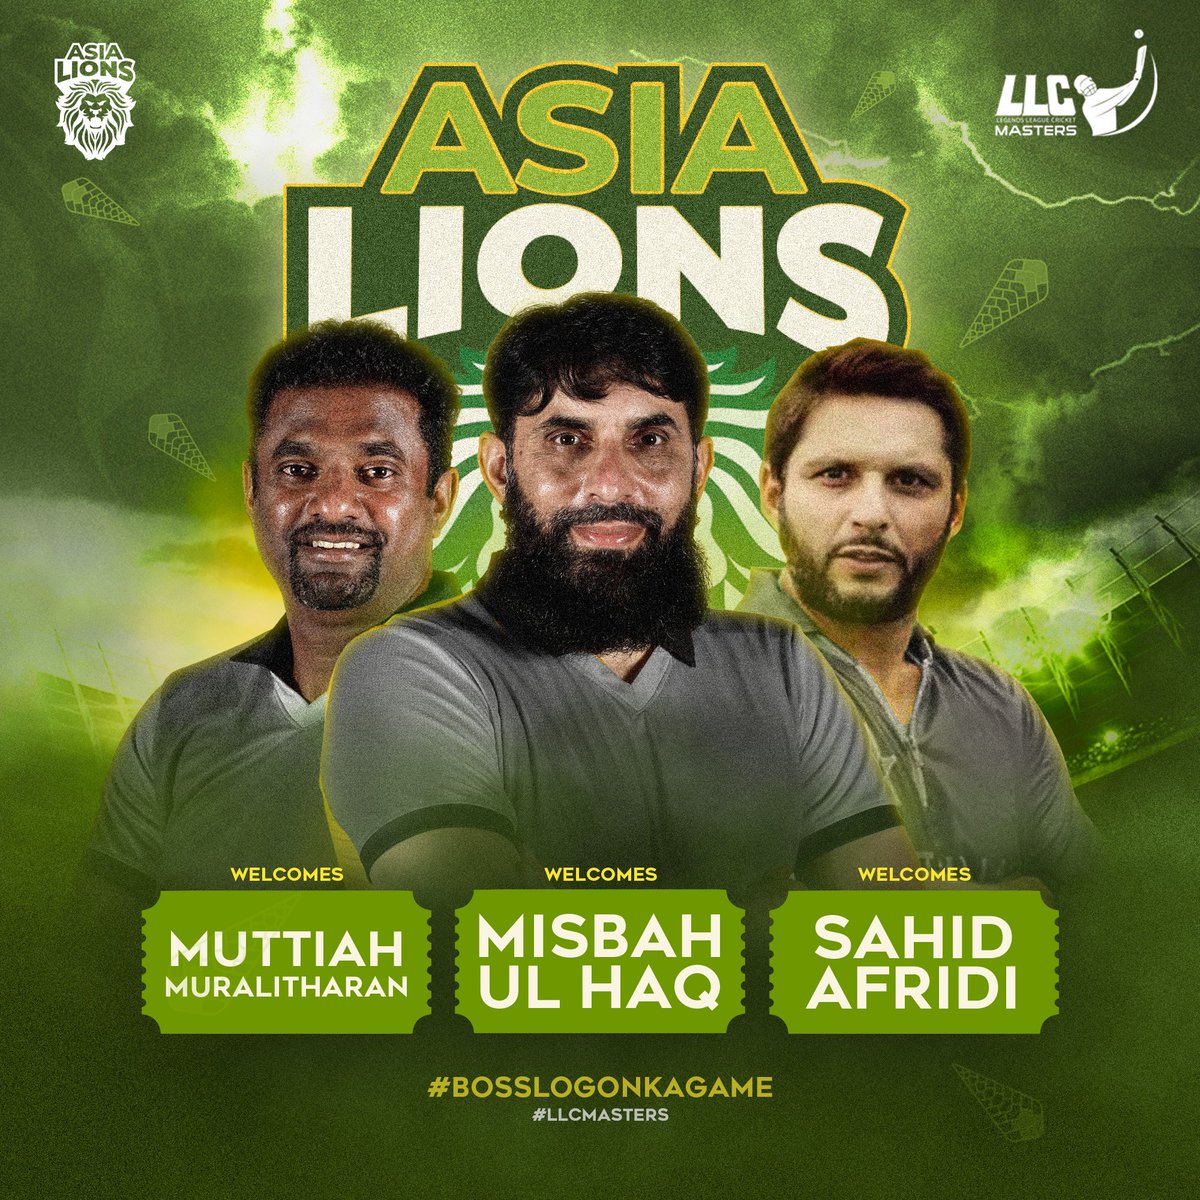 The Legends are ready to roar! Welcome to the team @captainmisbahpk @SAfridiOfficial @Murali_800 #LegendsLeagueCricket #LLCMasters #BossLogonKaGame